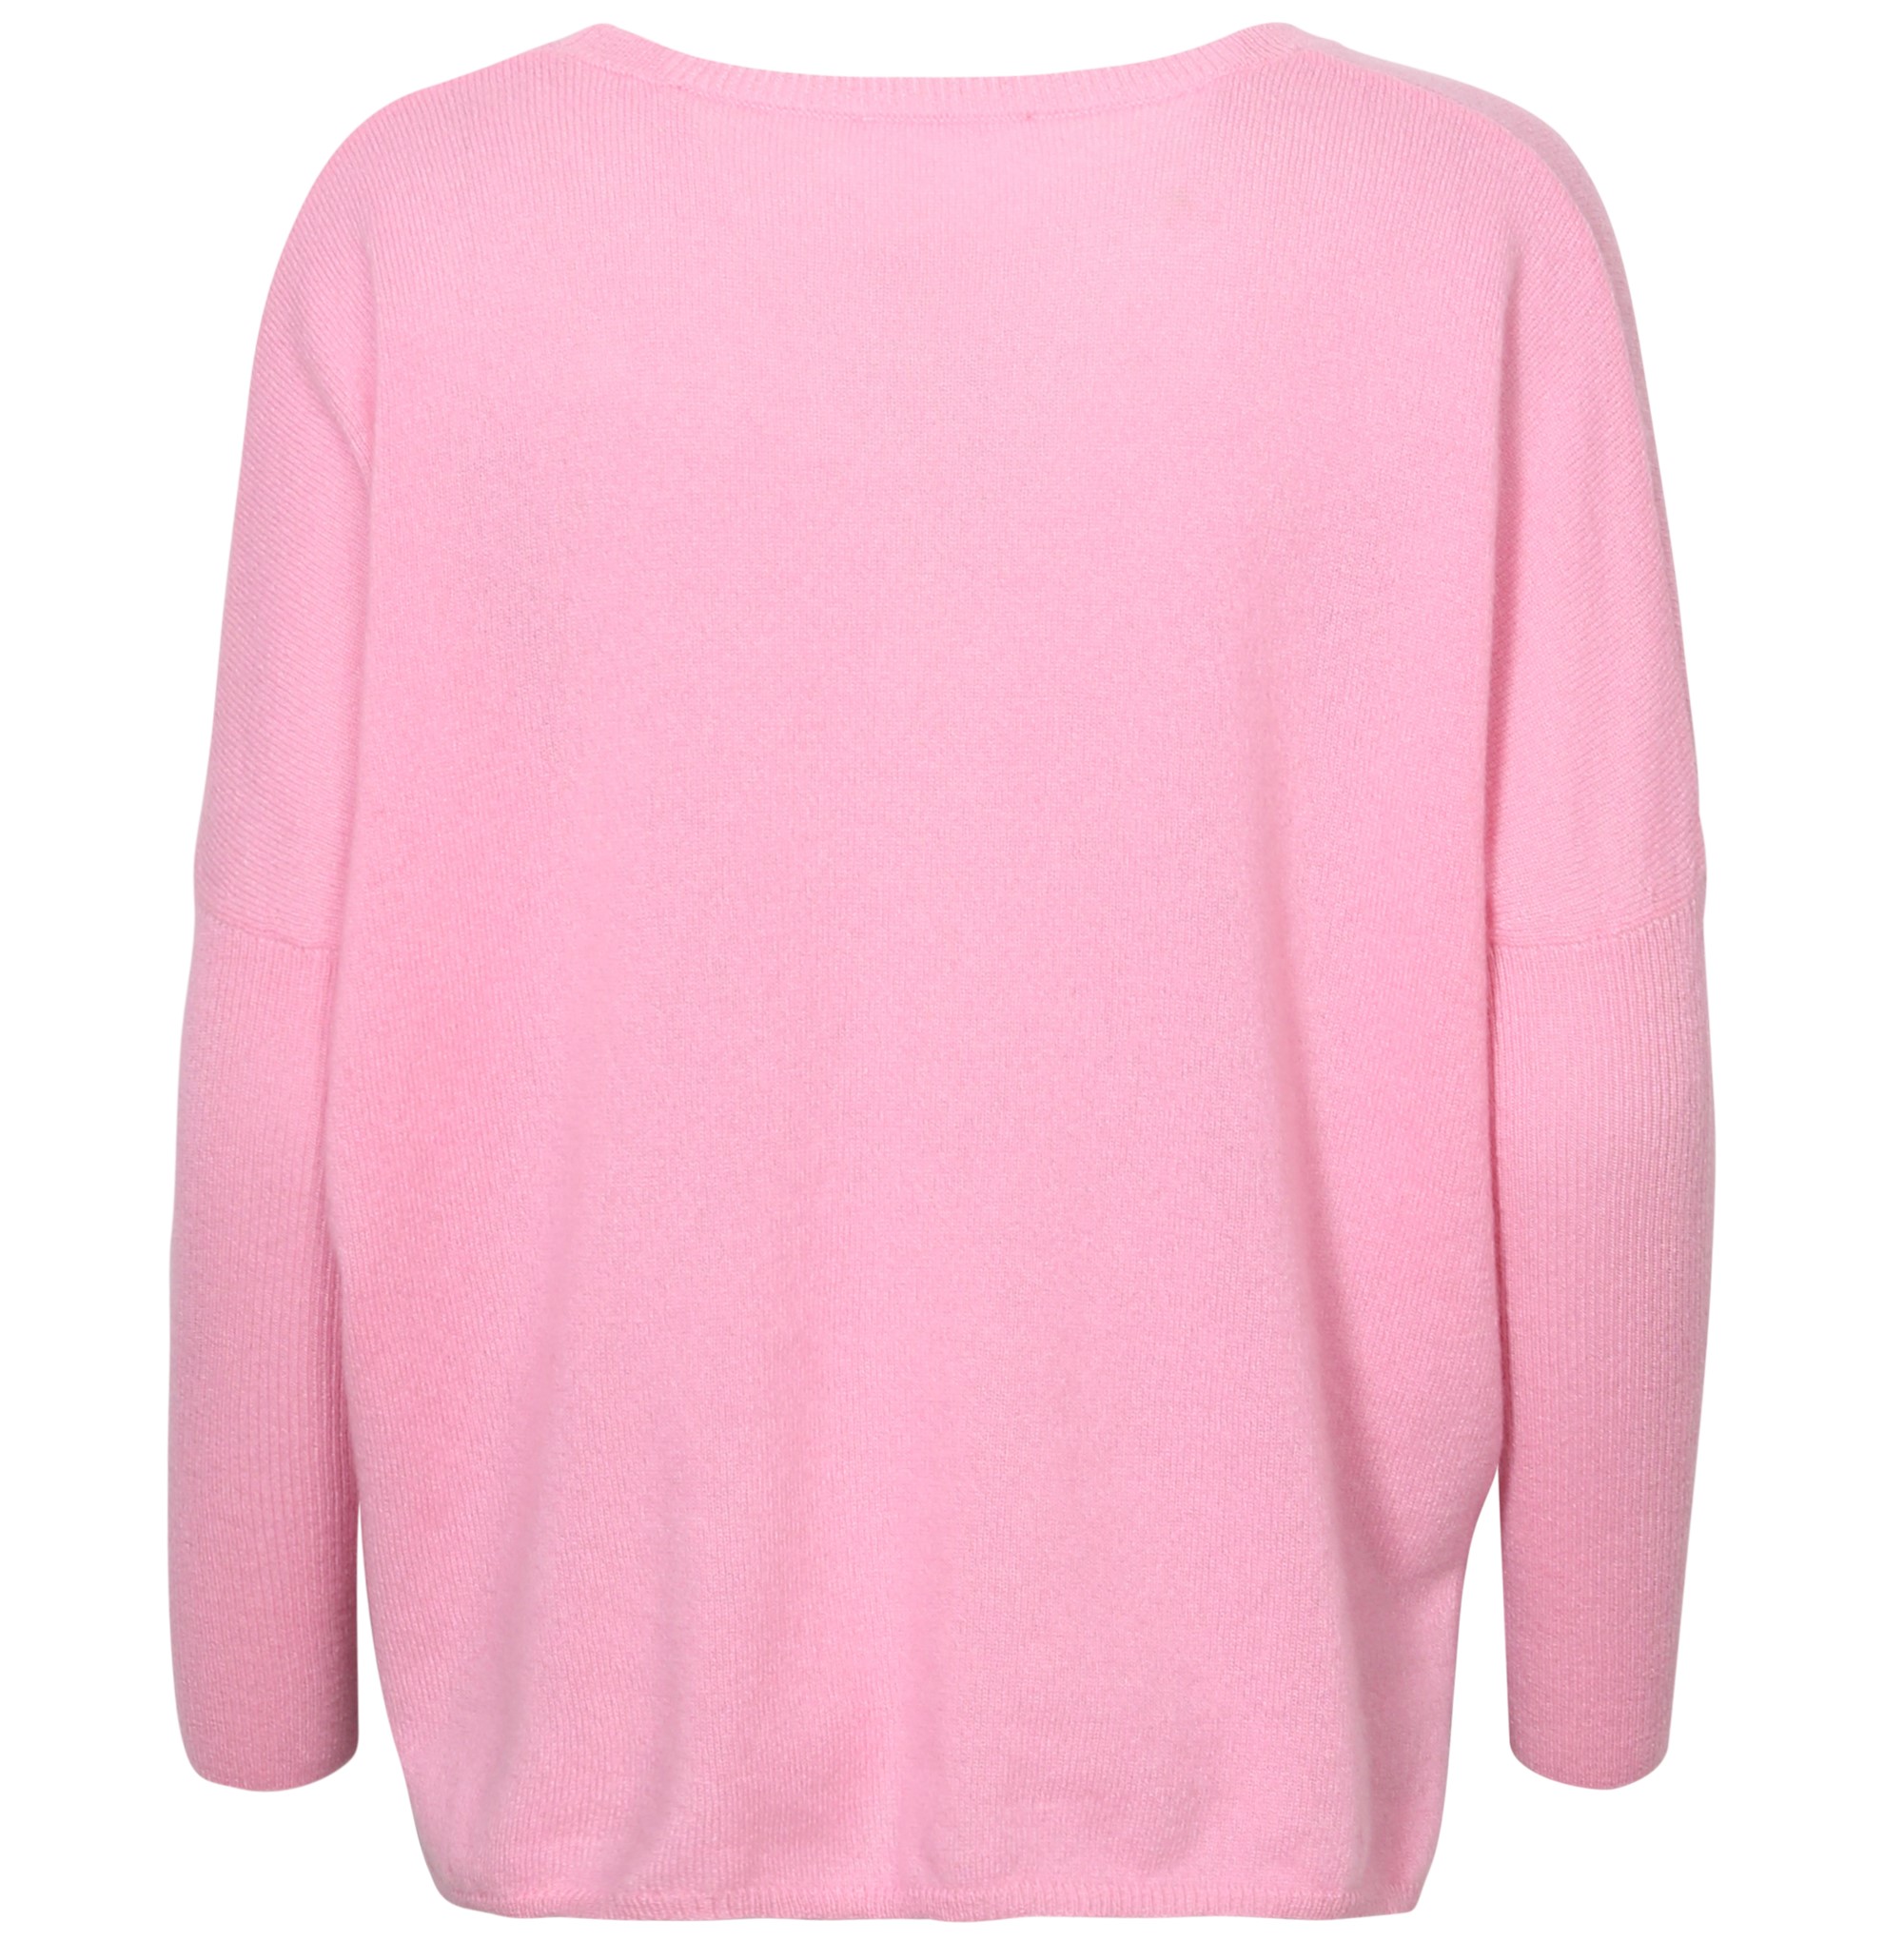 ABSOLUT CASHMERE Poncho Sweater Astrid in Light Pink M